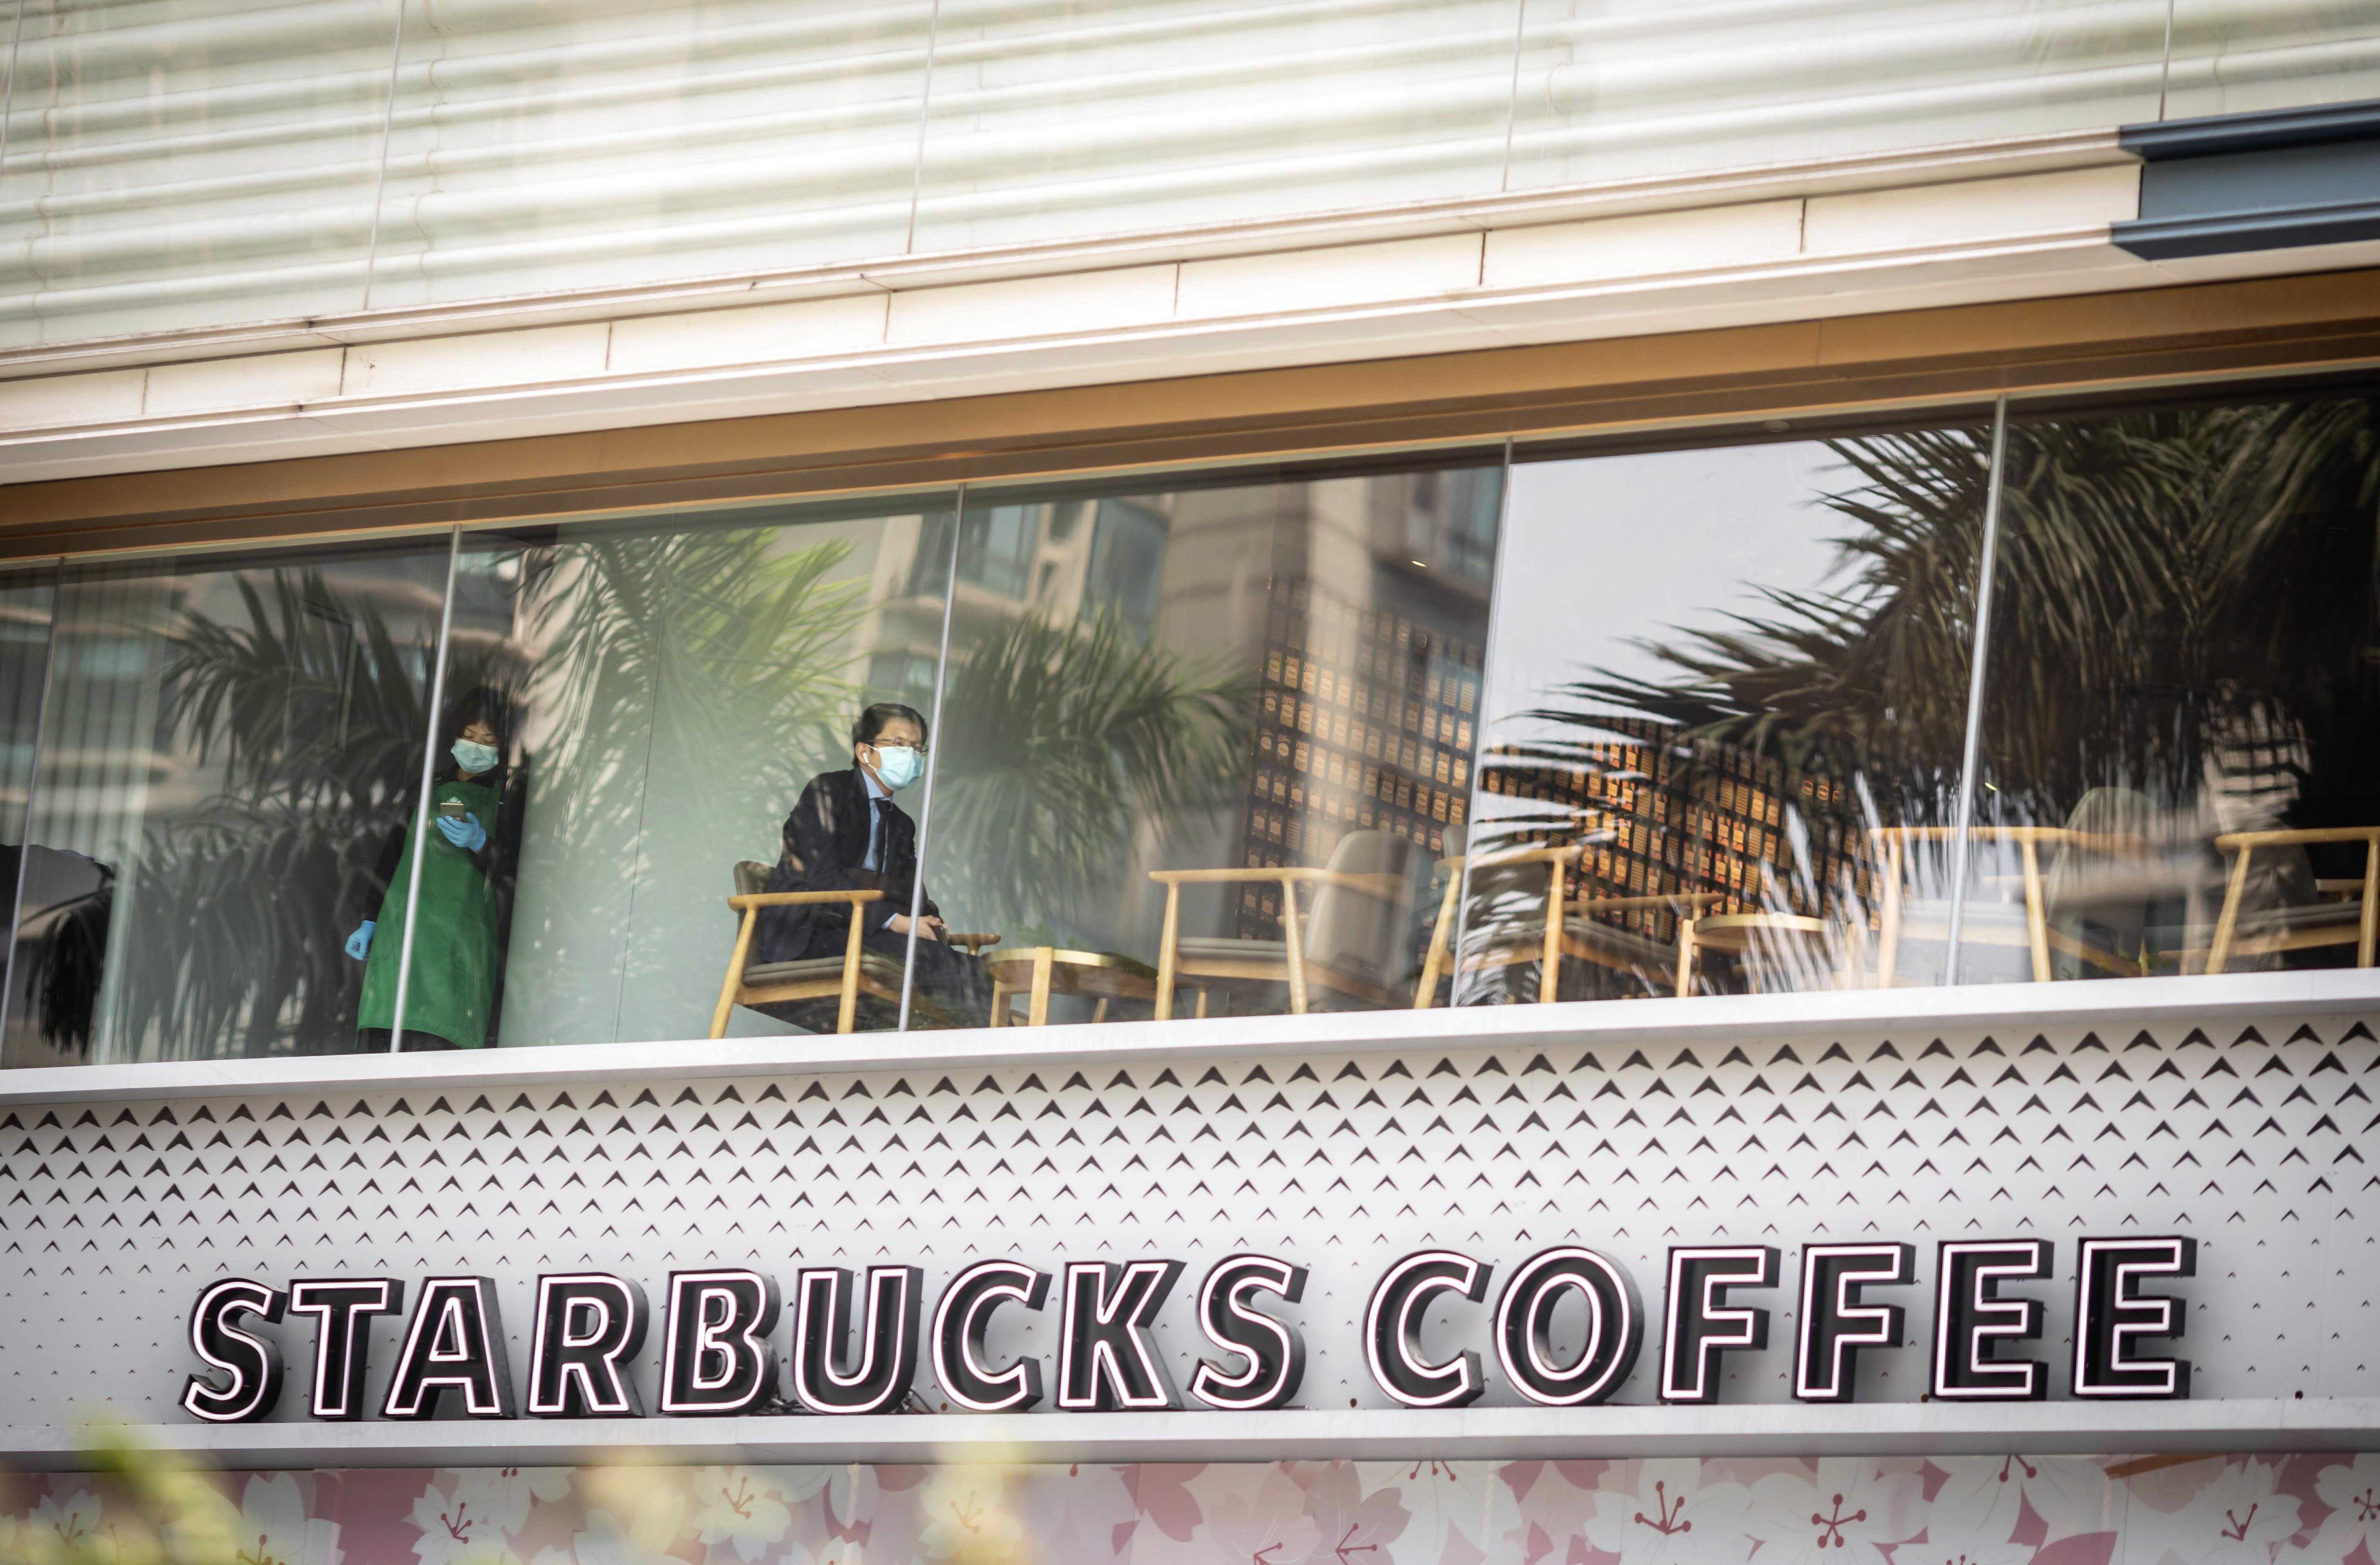 American chains Starbucks, McDonald’s and Subway were named on the People’s Bank of China’s list of firms that will test the digital currency in small transactions with 19 local businesses. Photo: EPA-EFE